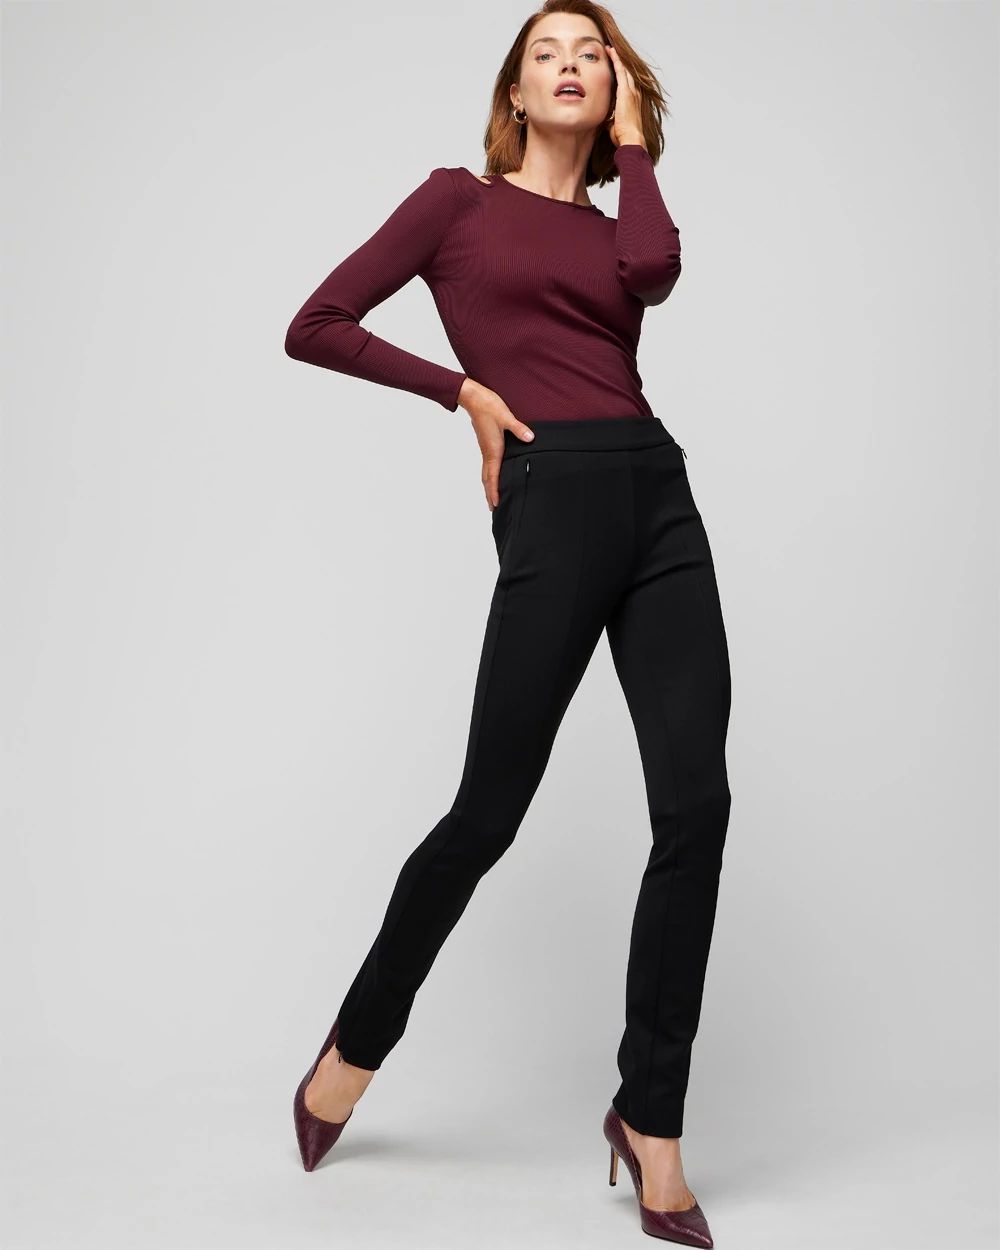 Luxe Stretch Skinny Pant click to view larger image.